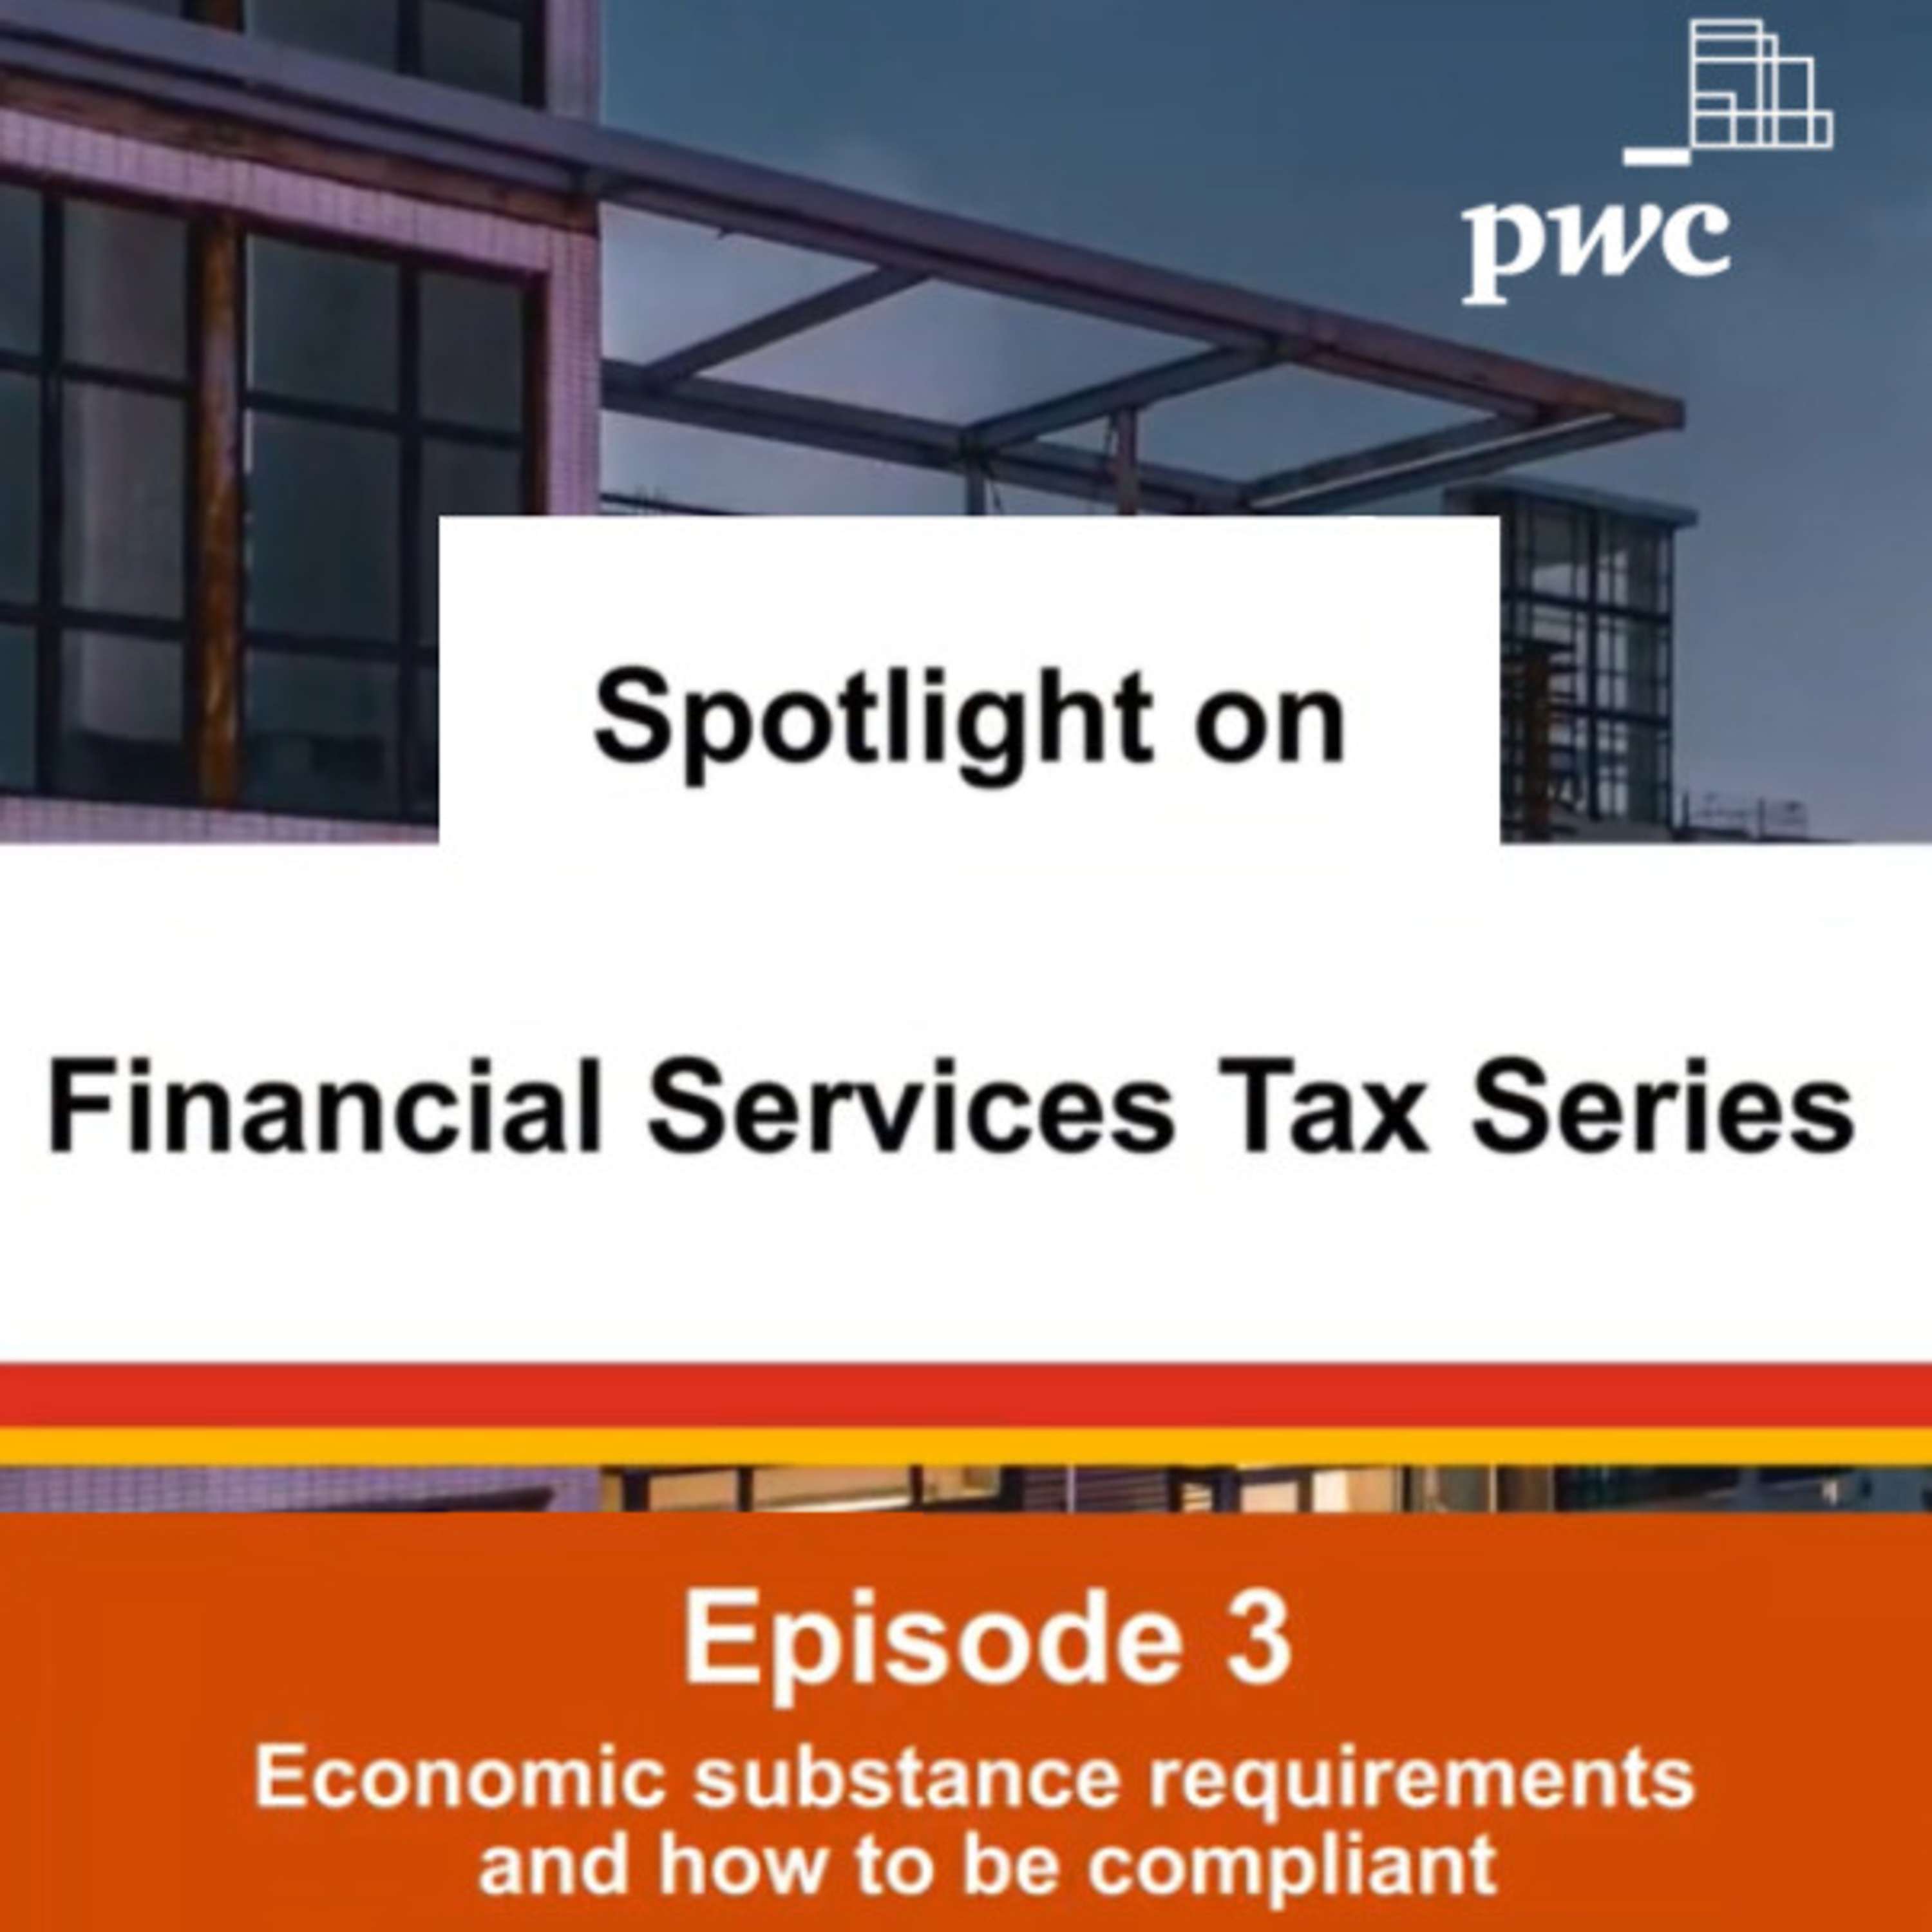 Series 1 - Episode 3: Economic substance requirements and how to be compliant